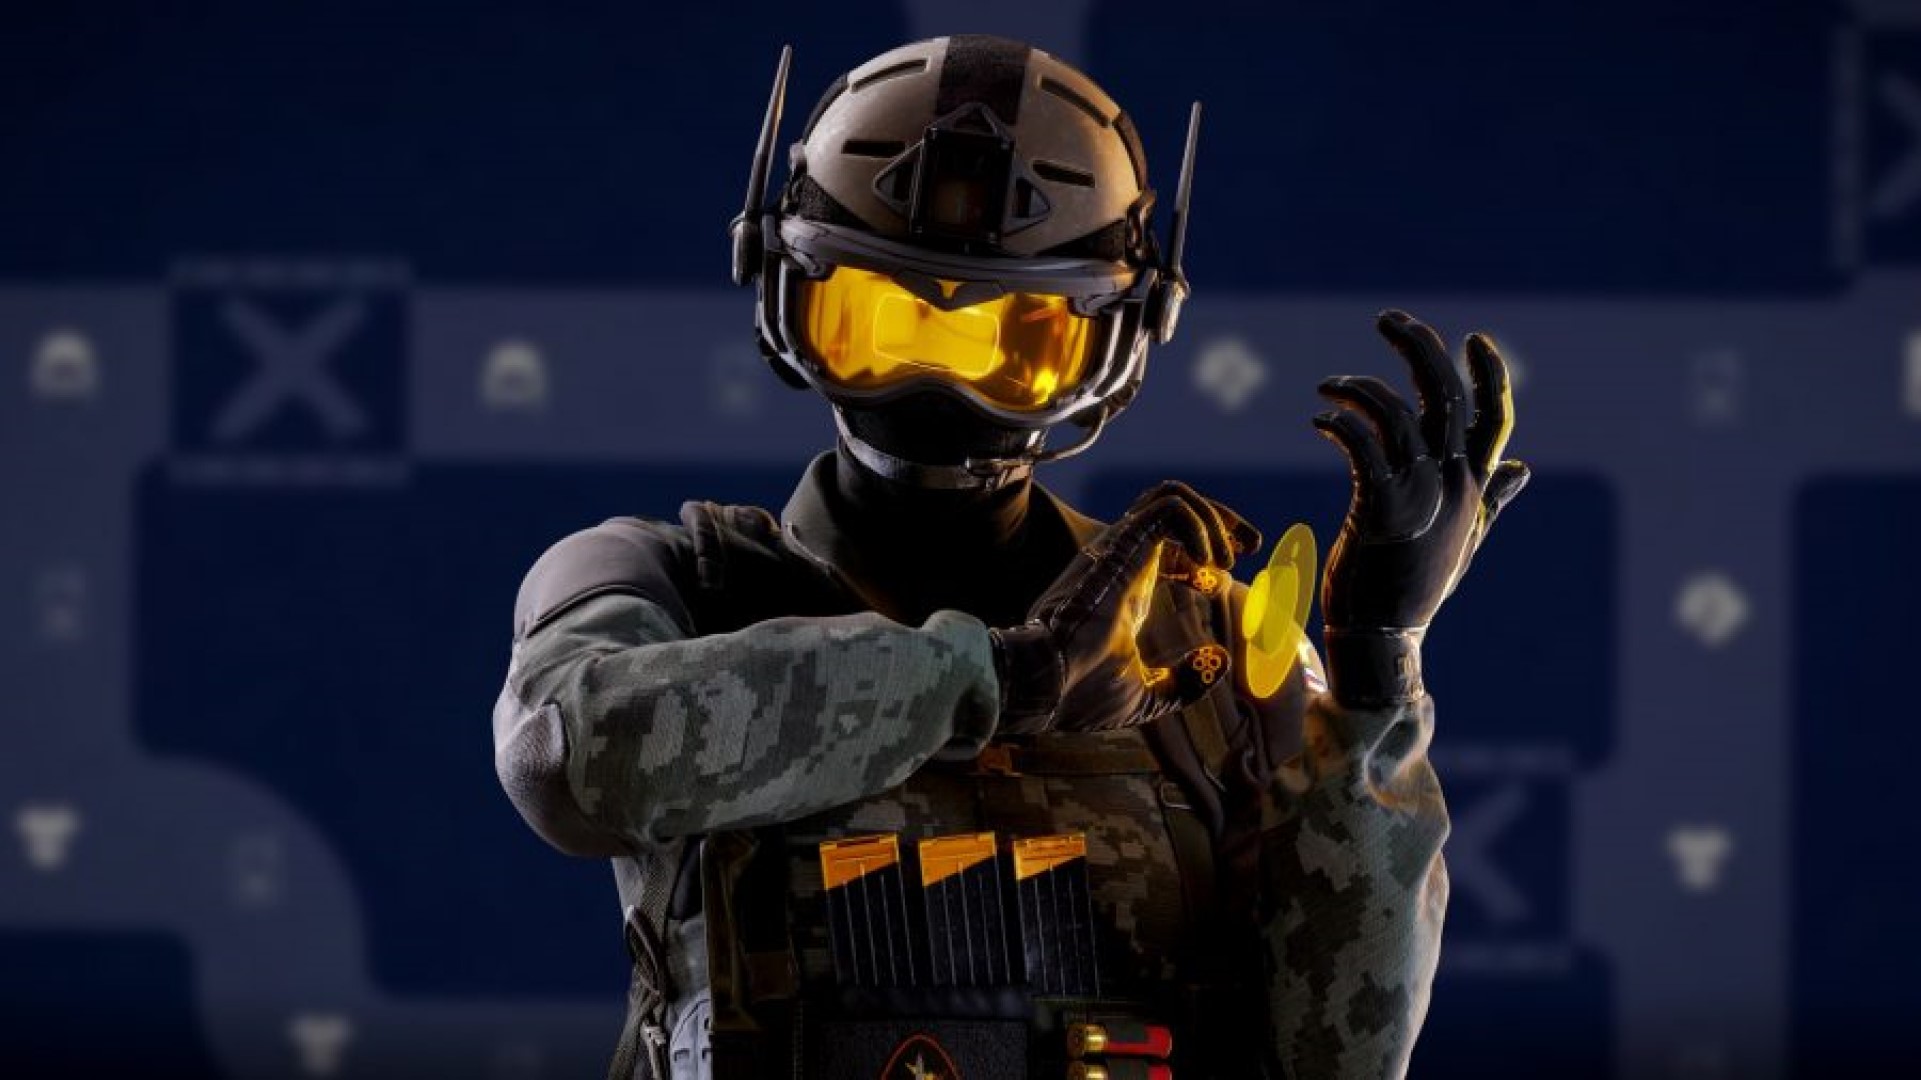 Best FPS Games: An agent in Rainbow Six Siege pulls up his wrist tactical device